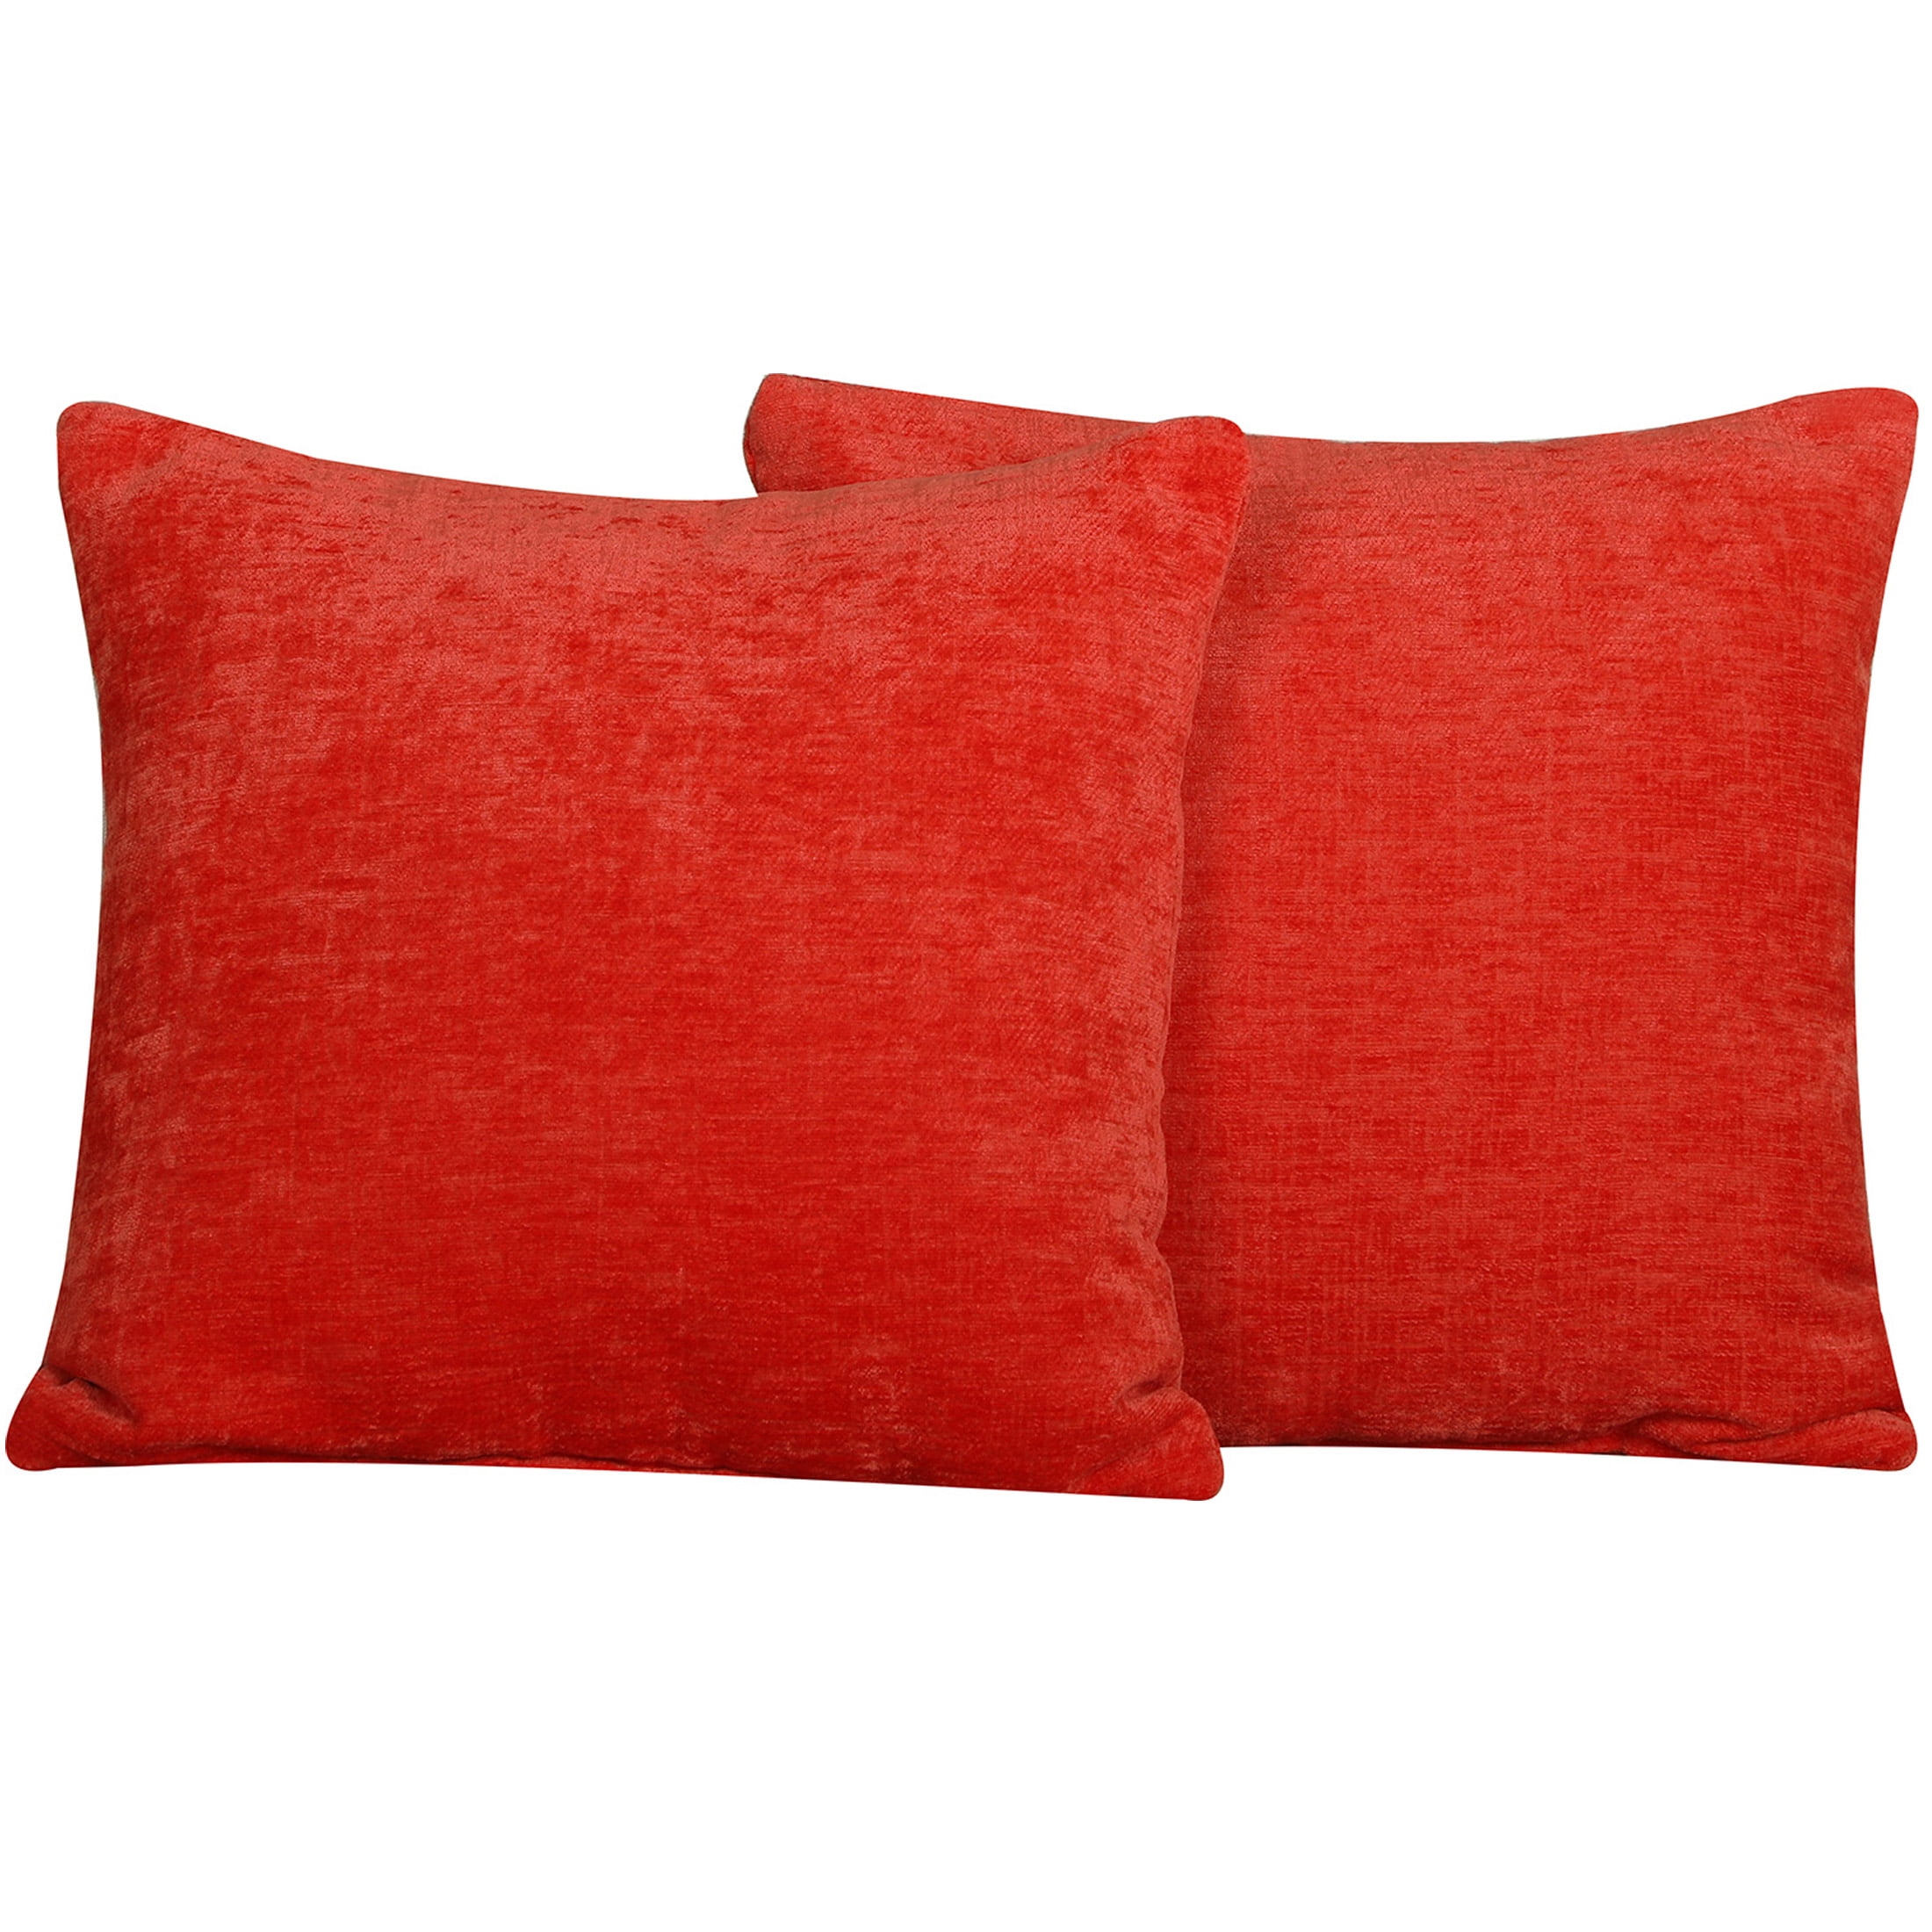 Mainstays 18 x 18 Solid Chenille Decorative Pillow Set - Red - 2 ct